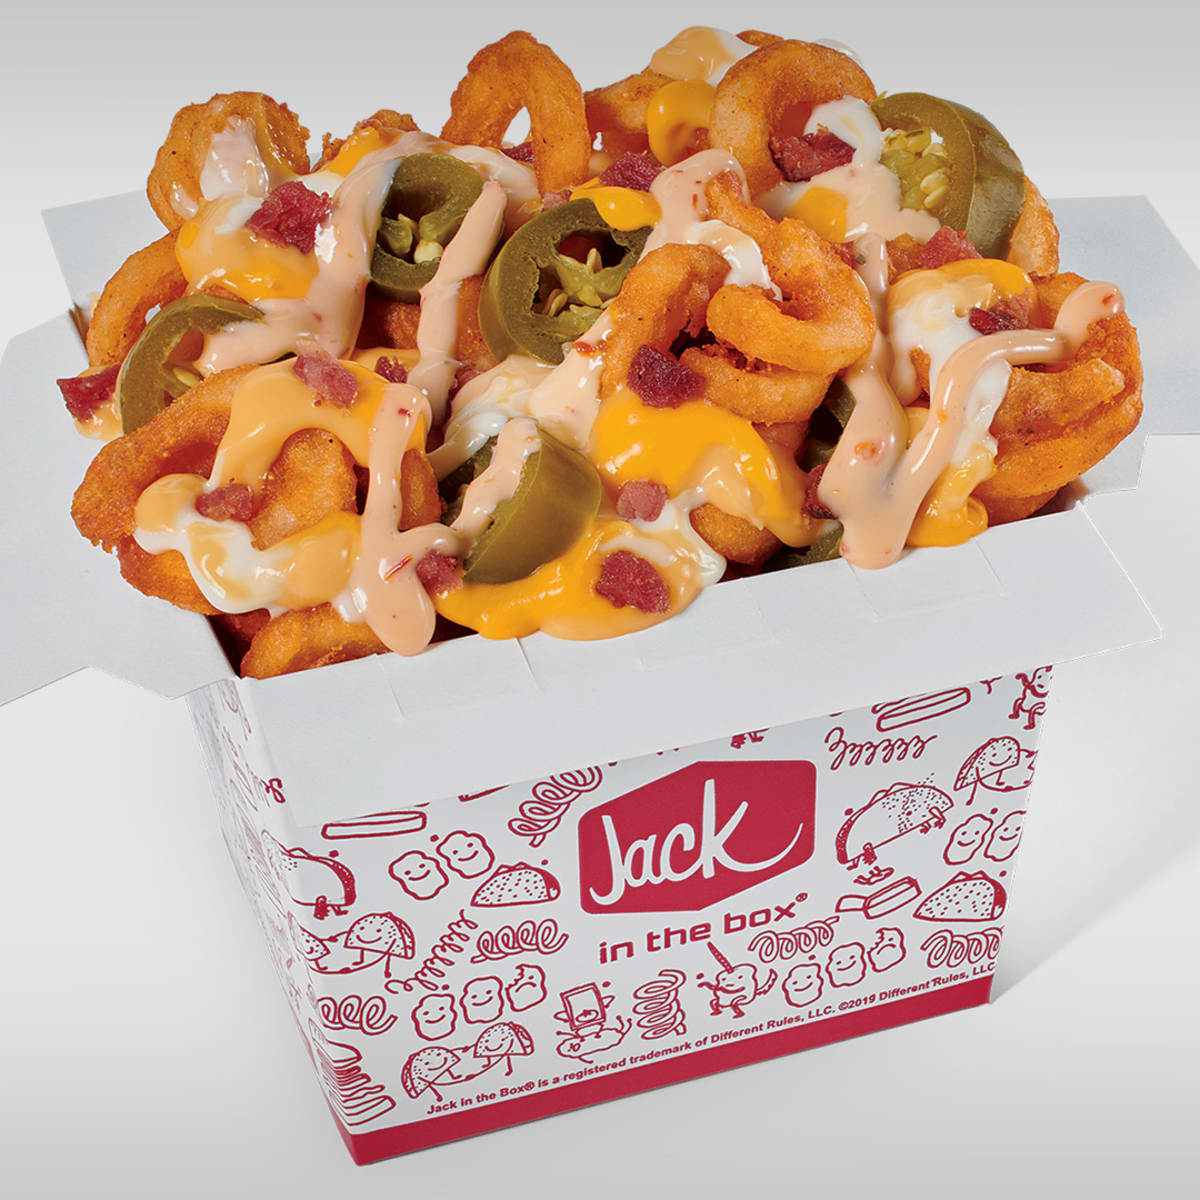 Jack in the Box Brings Back Classic Menu Items (a Few of Them) - TheStreet